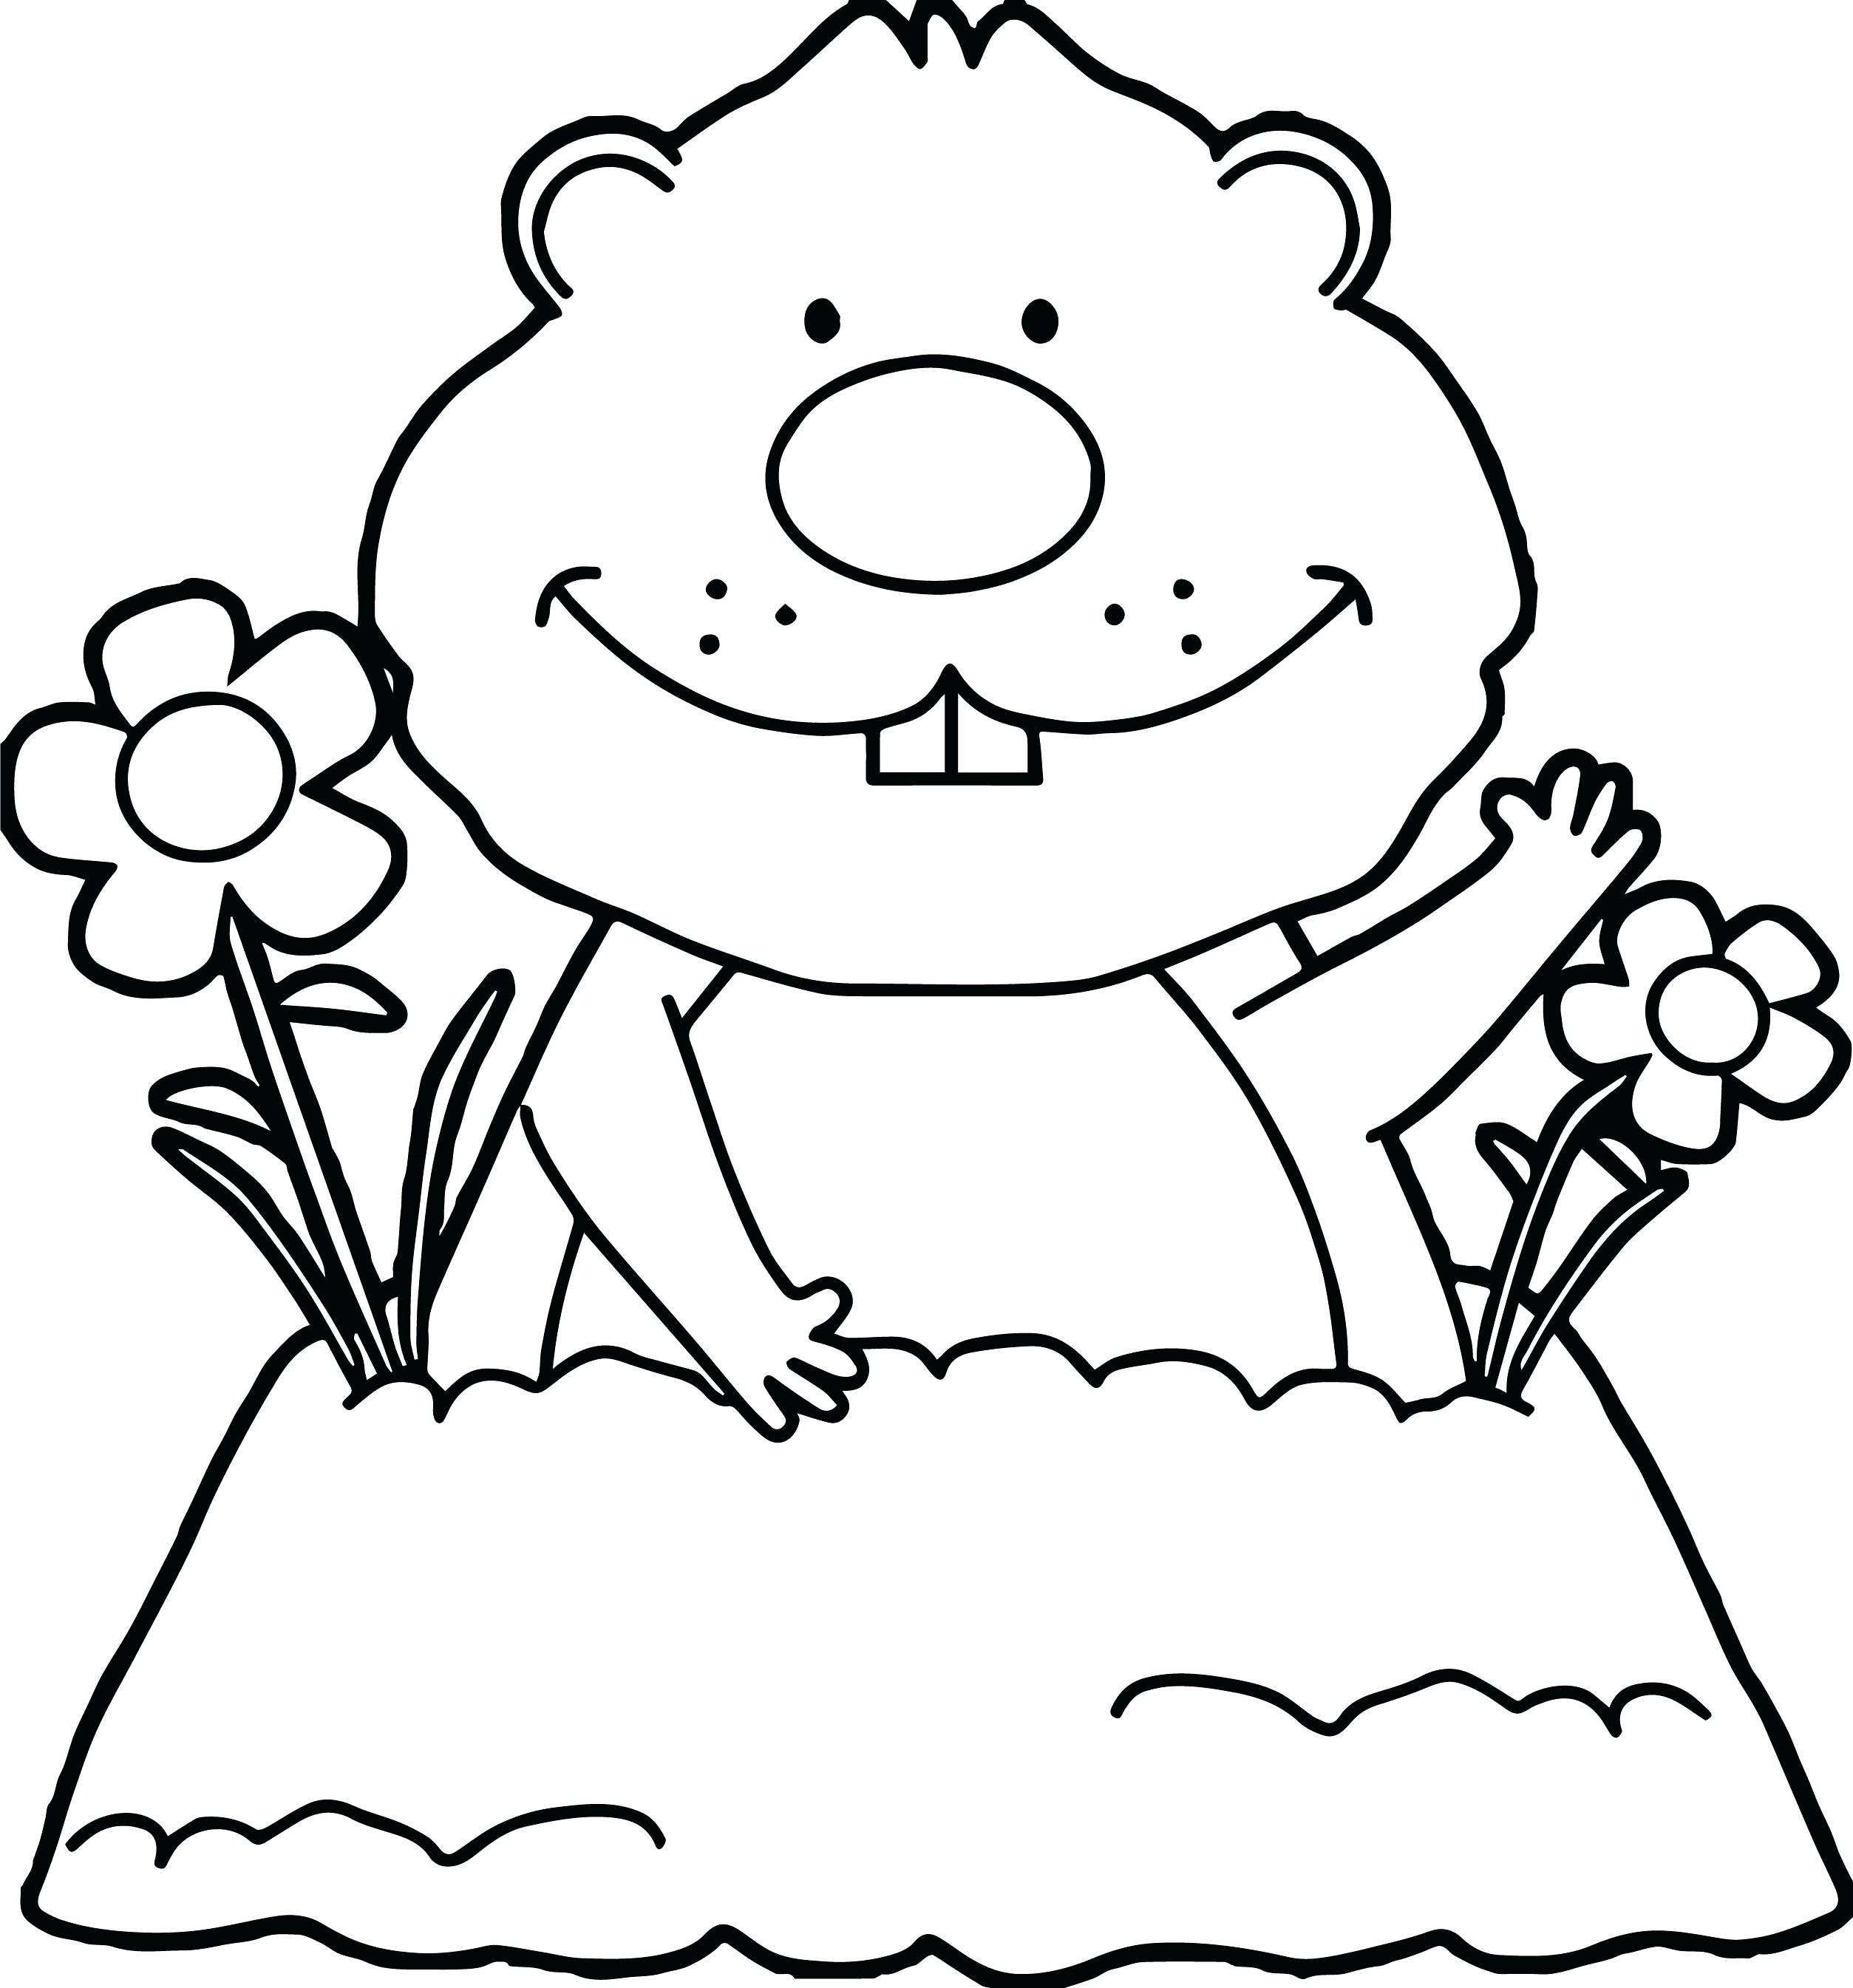 groundhog-day-coloring-pages-printable-groundhog-day-coloring-pages